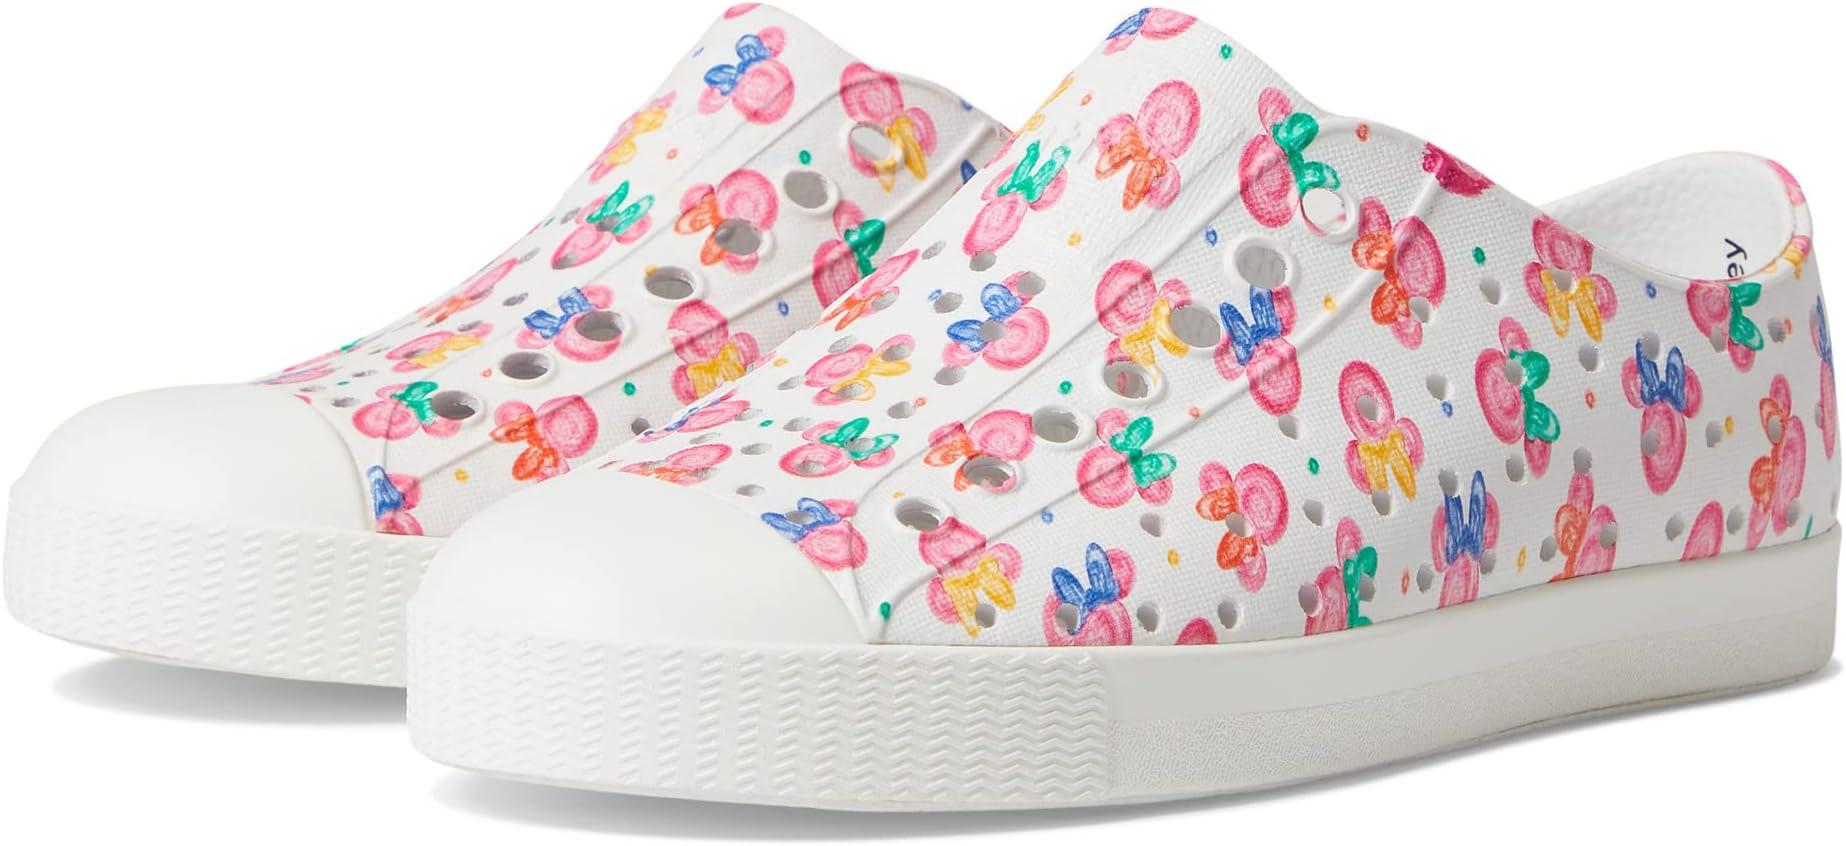 women shoes 2020 new spring small white shoes women s all around thick bottomed tidal shoes board shoes popular women s shoes Кроссовки Jefferson Disney Print Native Shoes Kids, цвет Shell White/Shell White/Minnie Paint Drops All Over Print